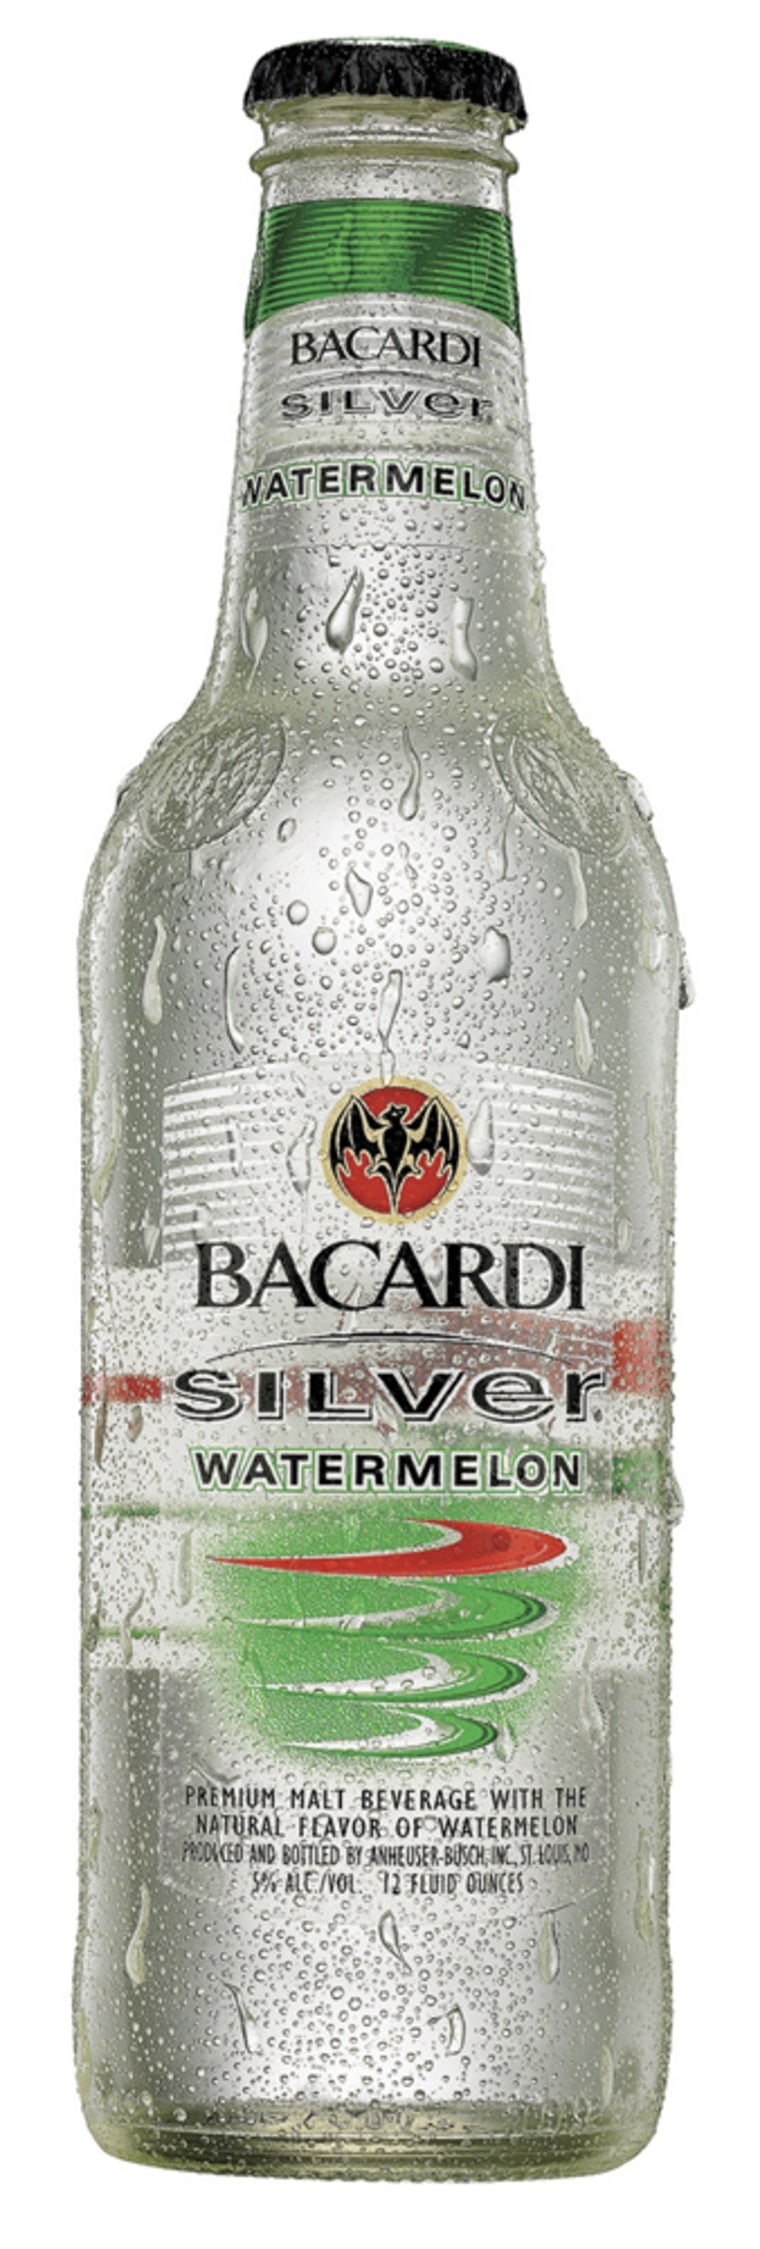 ANHEUSER-BUSCH INTRODUCES NEW BACARDI SILVER WATERMELON